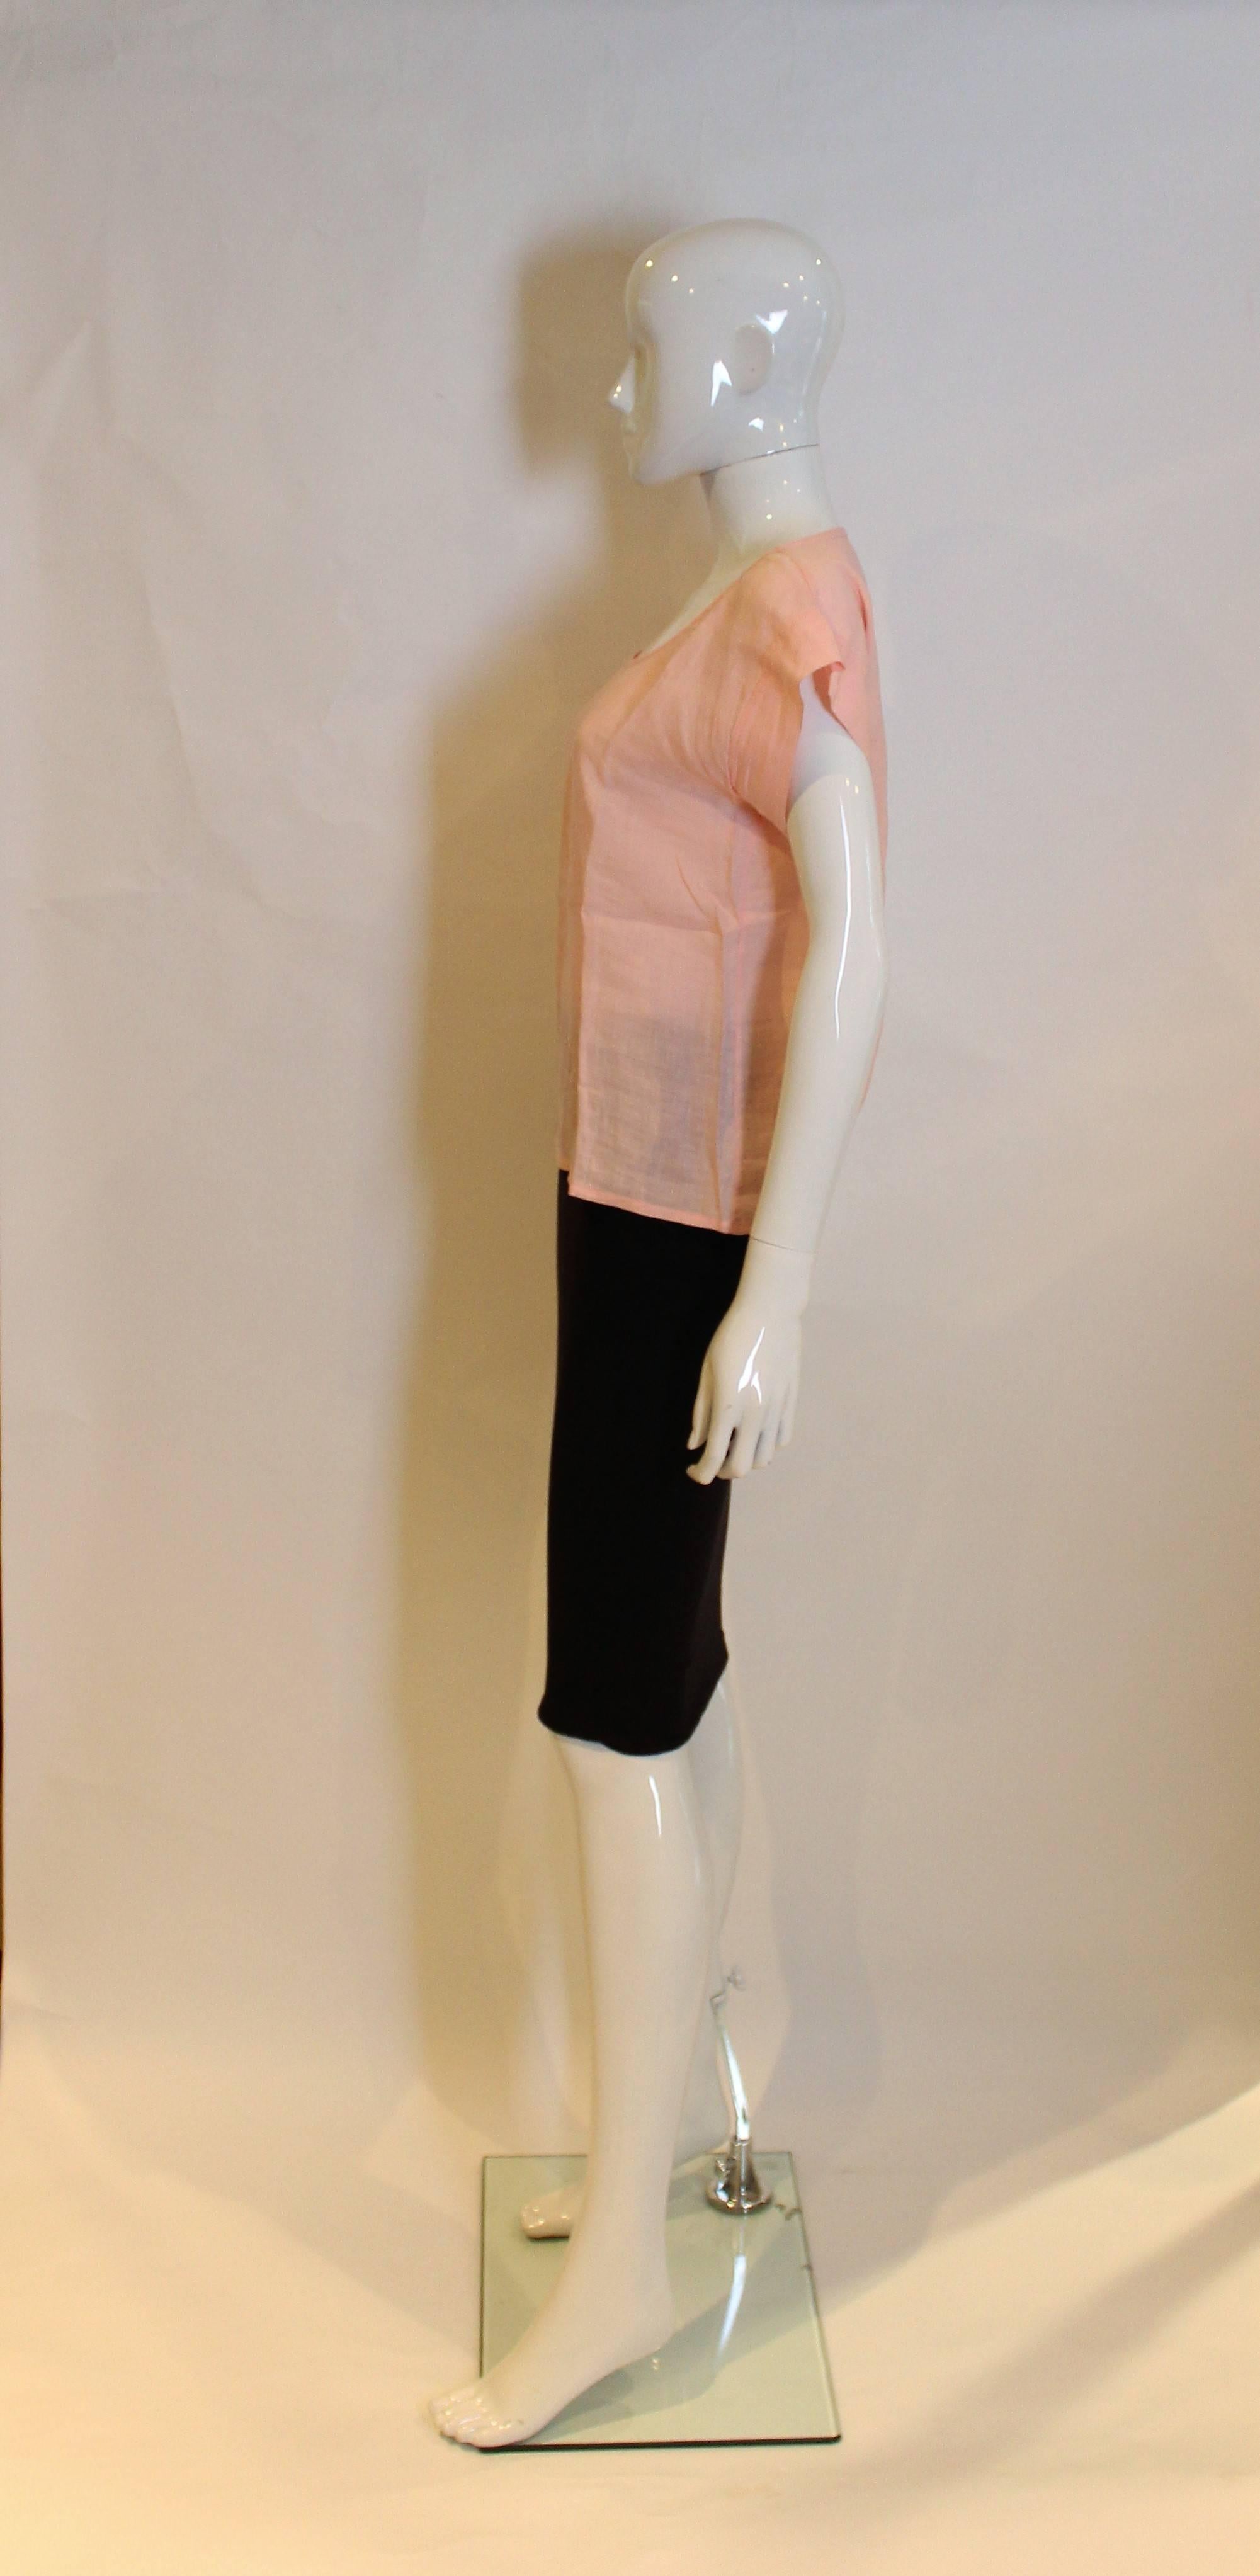 Yves Saint Laurent Rive Gauche Pink Linen Top In Excellent Condition For Sale In London, GB